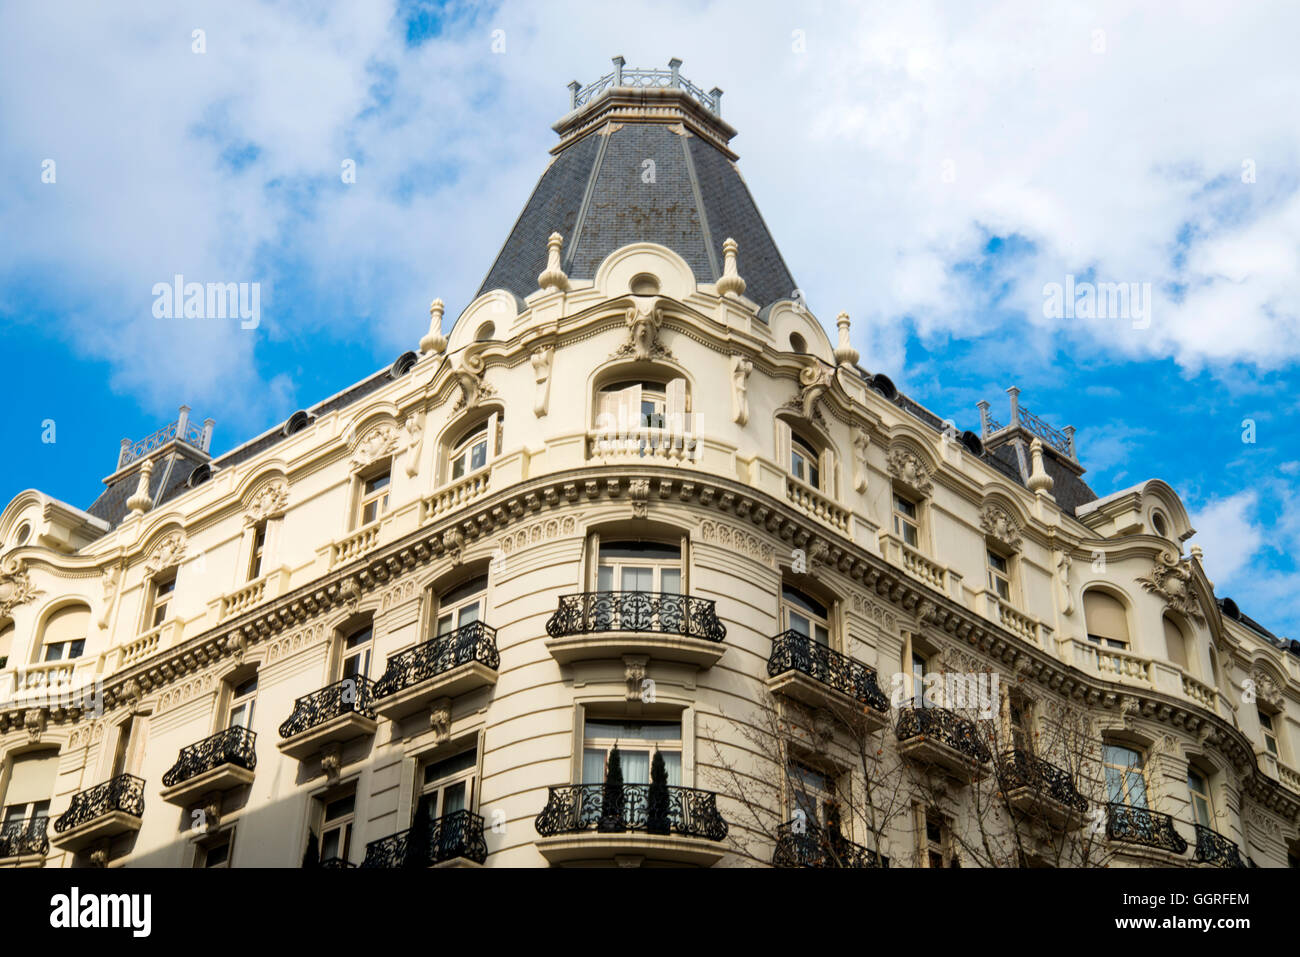 Serrano street madrid hi-res stock photography and images - Alamy